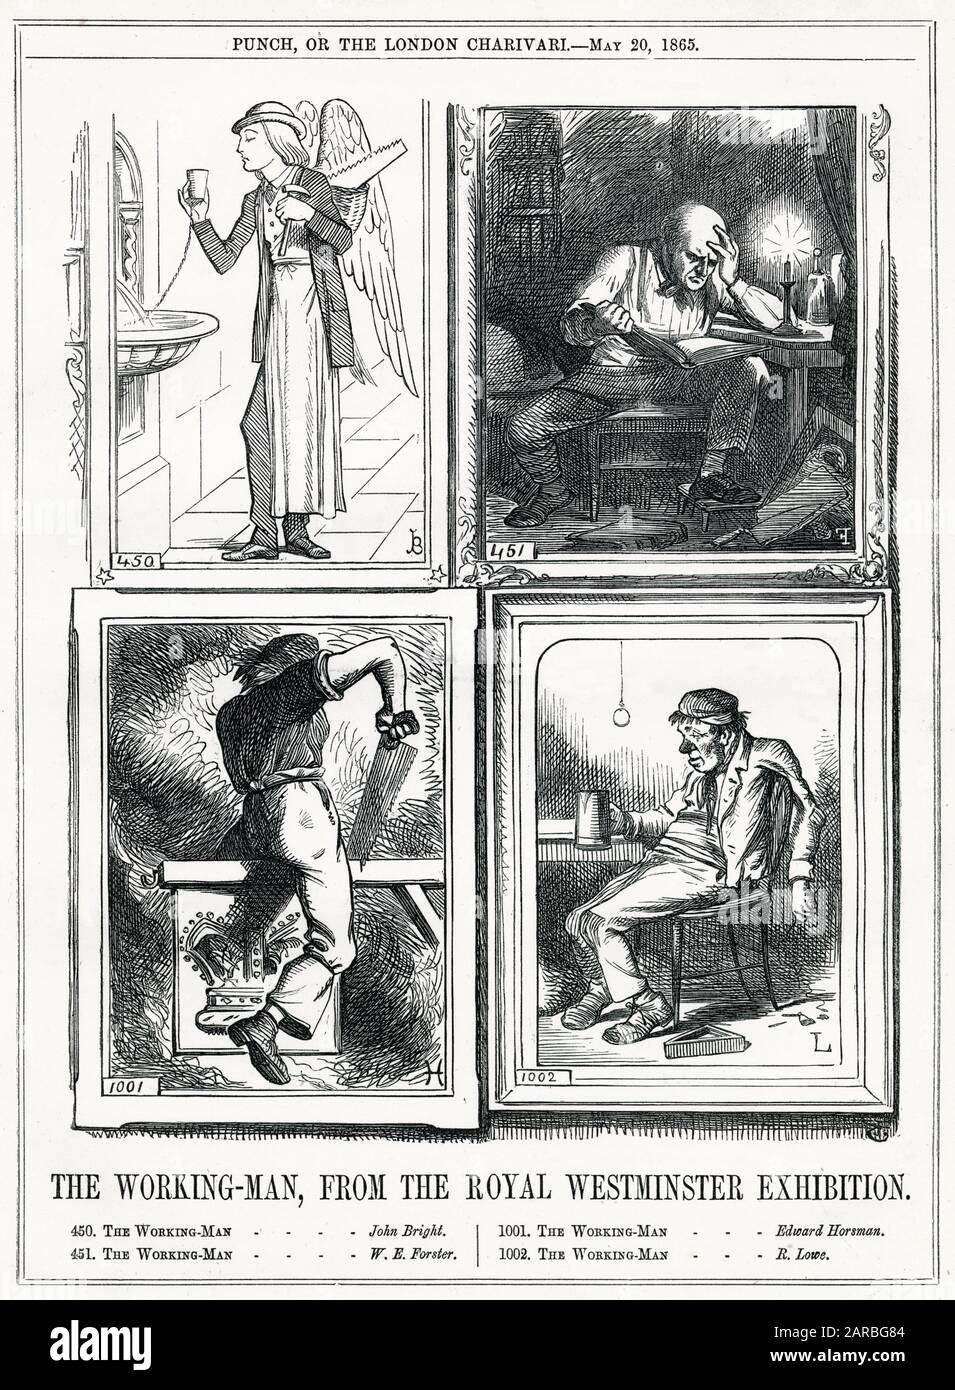 Cartoon, The Working-Man, from the Royal Westminster Exhibition. A satire on the Royal Academy Exhibition, where many paintings depicted working men. The four spoof portraits here imagine how four different politicians would portray the working man -- for John Bright he is pure and angelic, for Edward Horsman he is a threat, both to the monarchy and to himself, for W E Forster he is a studious self-improver, and for Robert Lowe he is a passive drunkard. Stock Photo